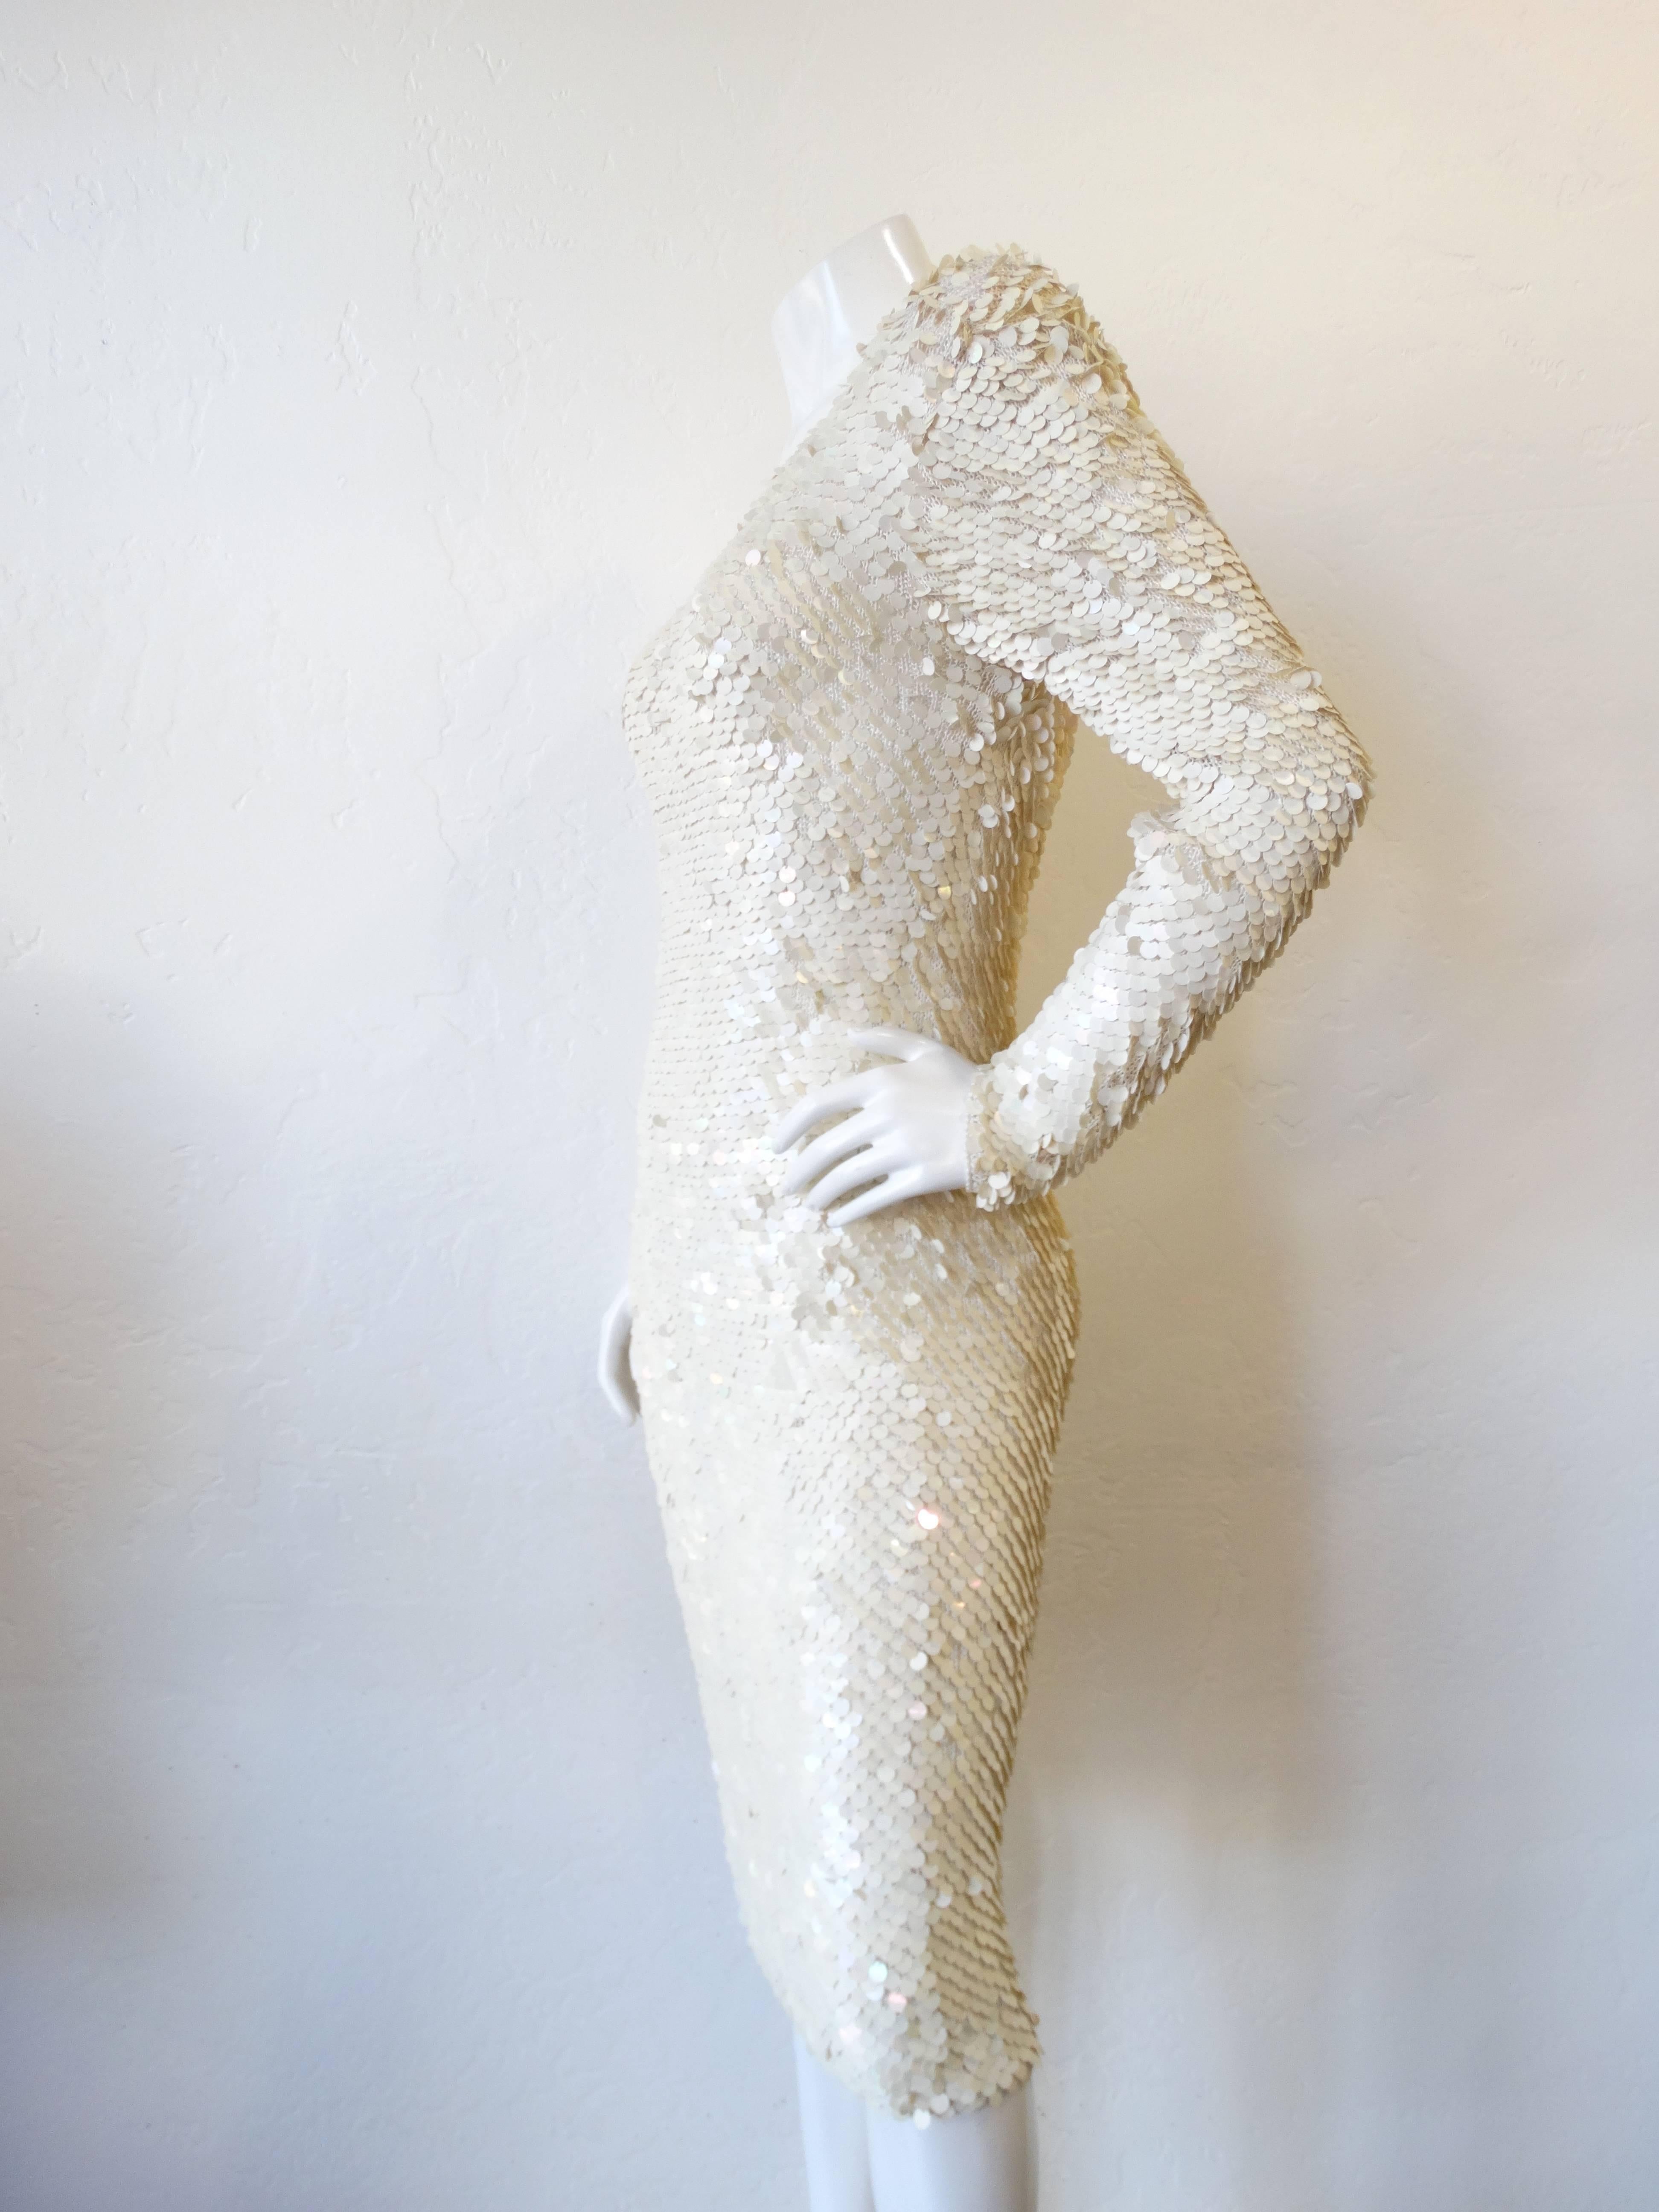 Nobody does sequins like vintage does! This piece is made of a creamy white knit and COVERED in pearlescent circle sequins. This dress hugs every curve perfectly, and dips in the back to show a little skin. The fabric has some stretch to it so it